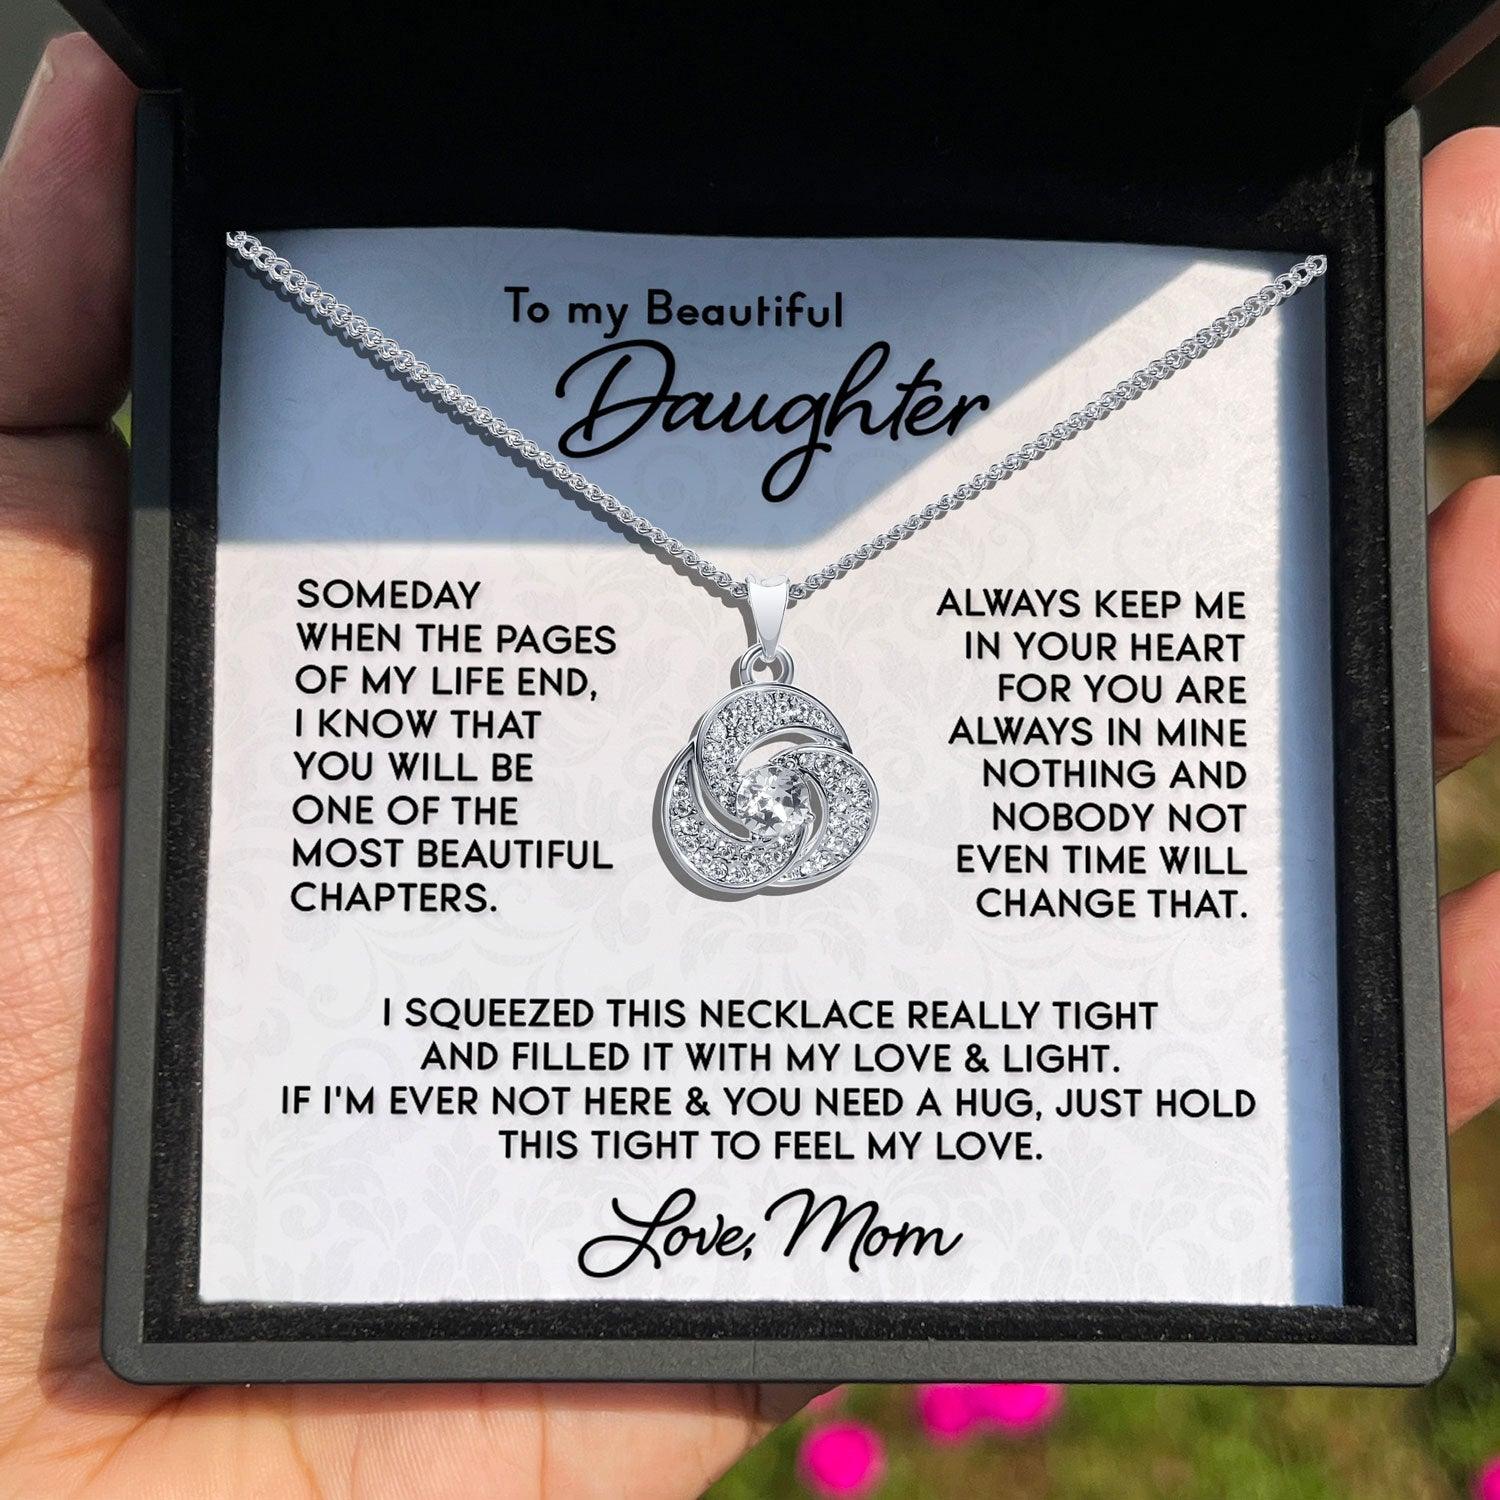 To My Beautiful Daughter - You Will Be One of The Most Beautiful Chapters of My Life - Tryndi Love Knot Necklace - TRYNDI